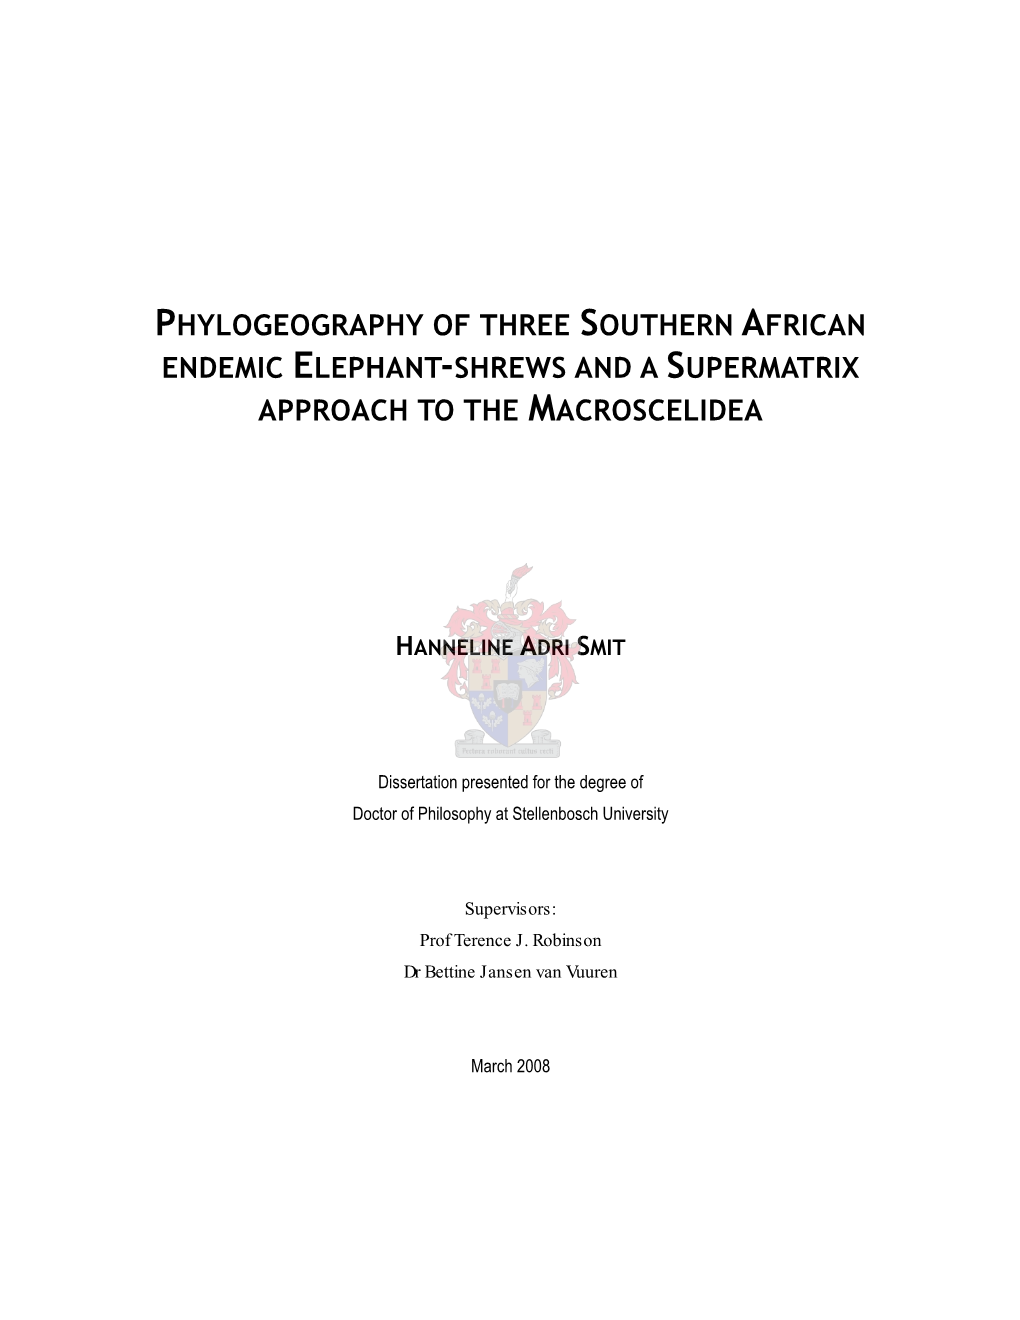 Phylogeography of Three Southern African Endemic Elephant-Shrews and a Supermatrix Approach to the Macroscelidea